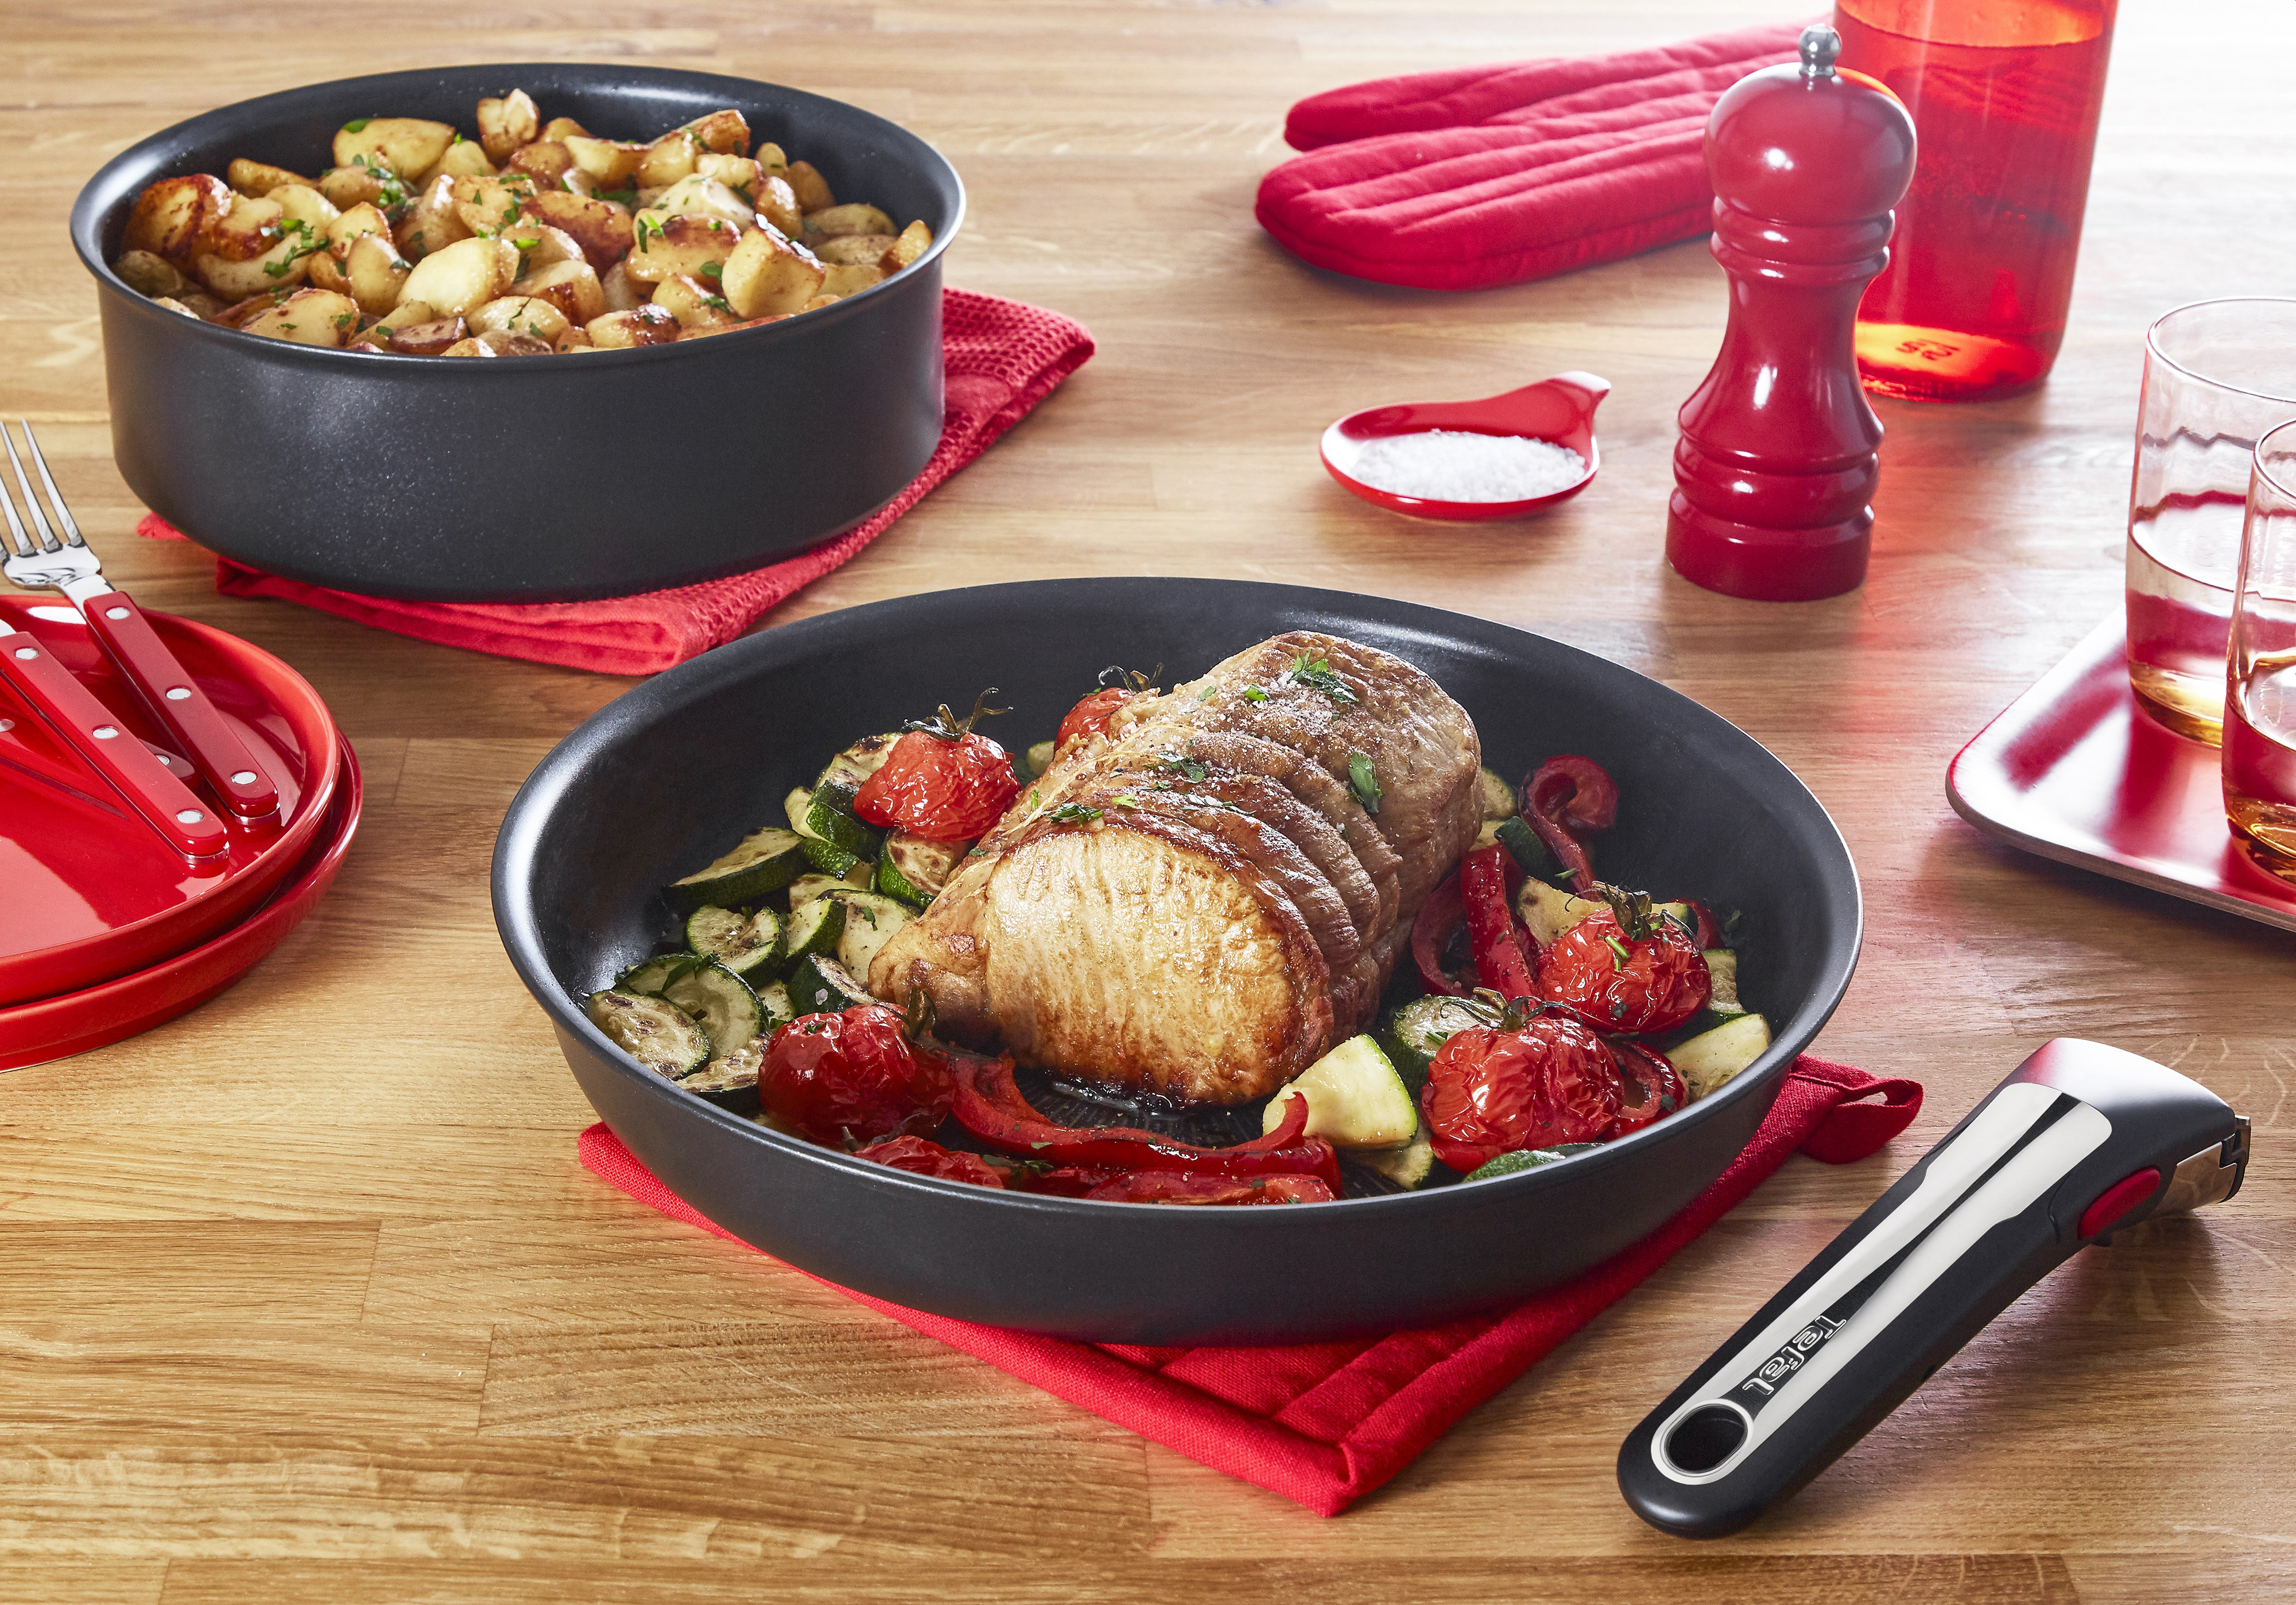 https://www.nordicnest.com/assets/blobs/tefal-ingenio-unlimited-on-frying-pan-and-saucepan-set-5-pieces/515077-01_6_EnvironmentImage-a558181c5c.jpeg